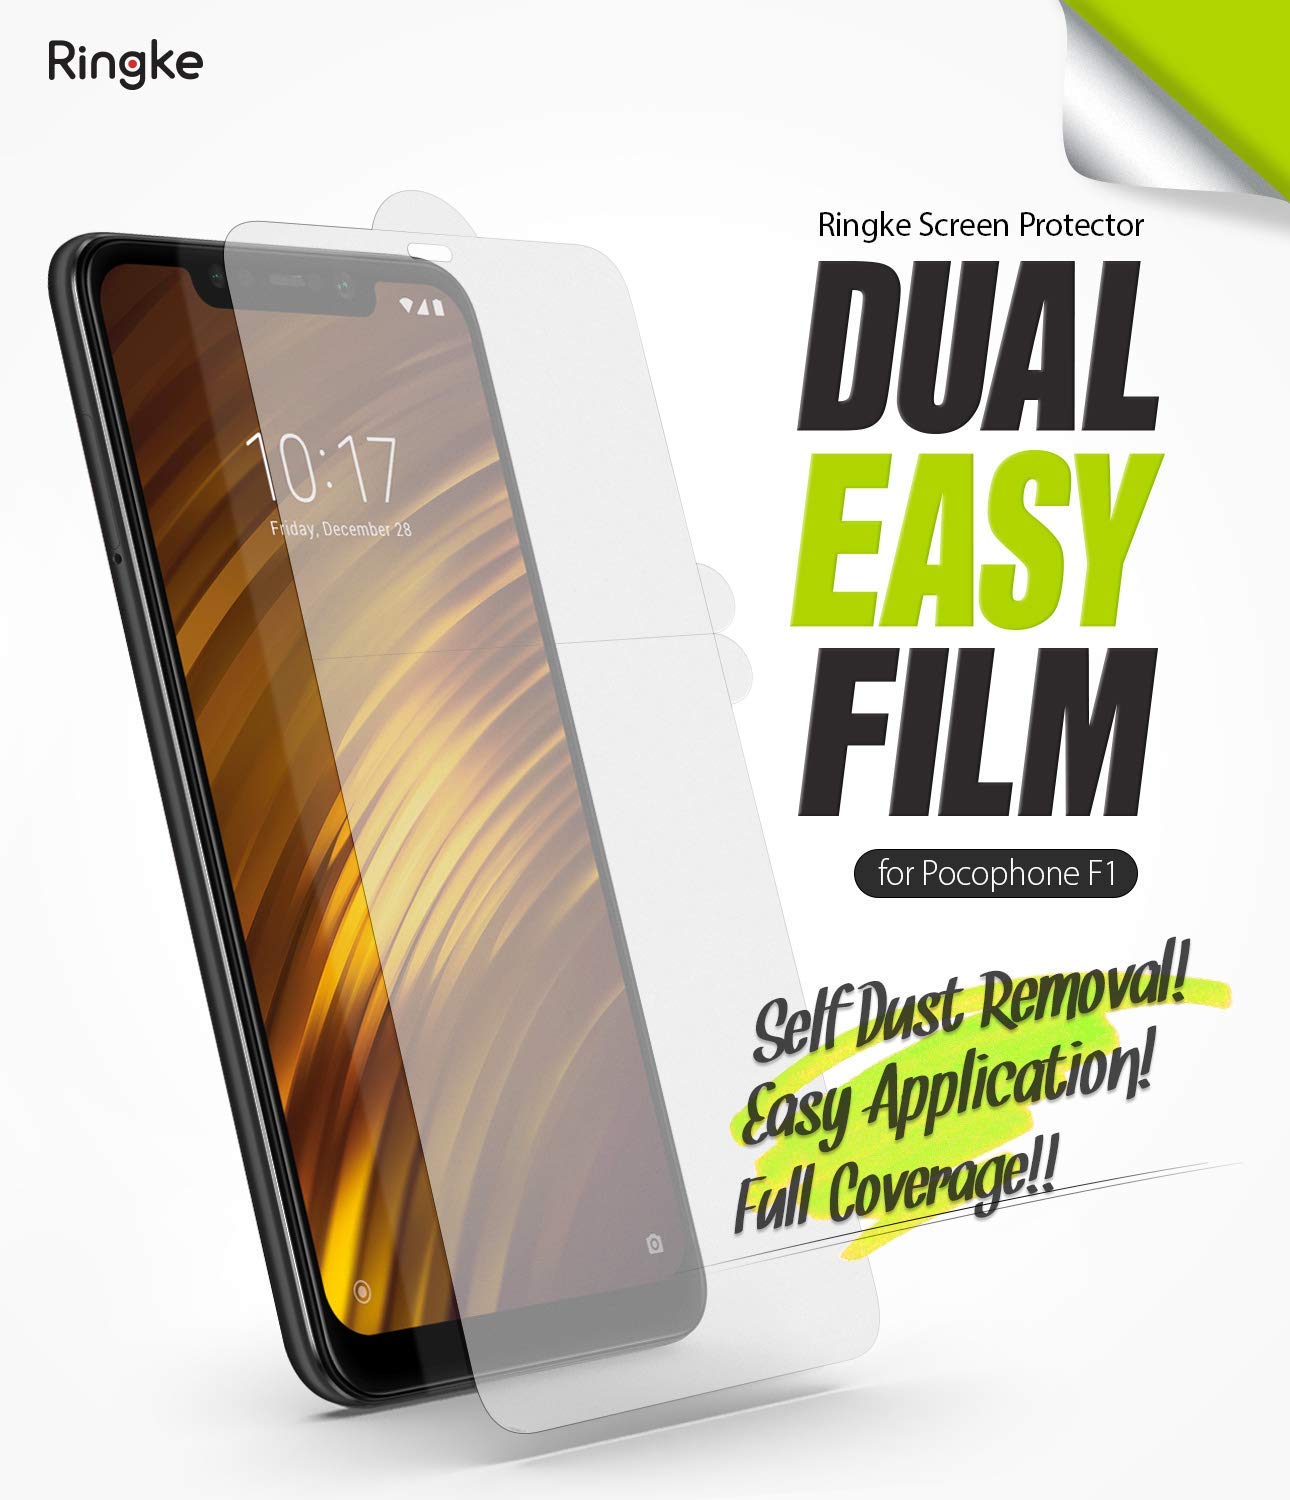 xiaomi pocophone f1 dual easy full cover screen protector 2 pack